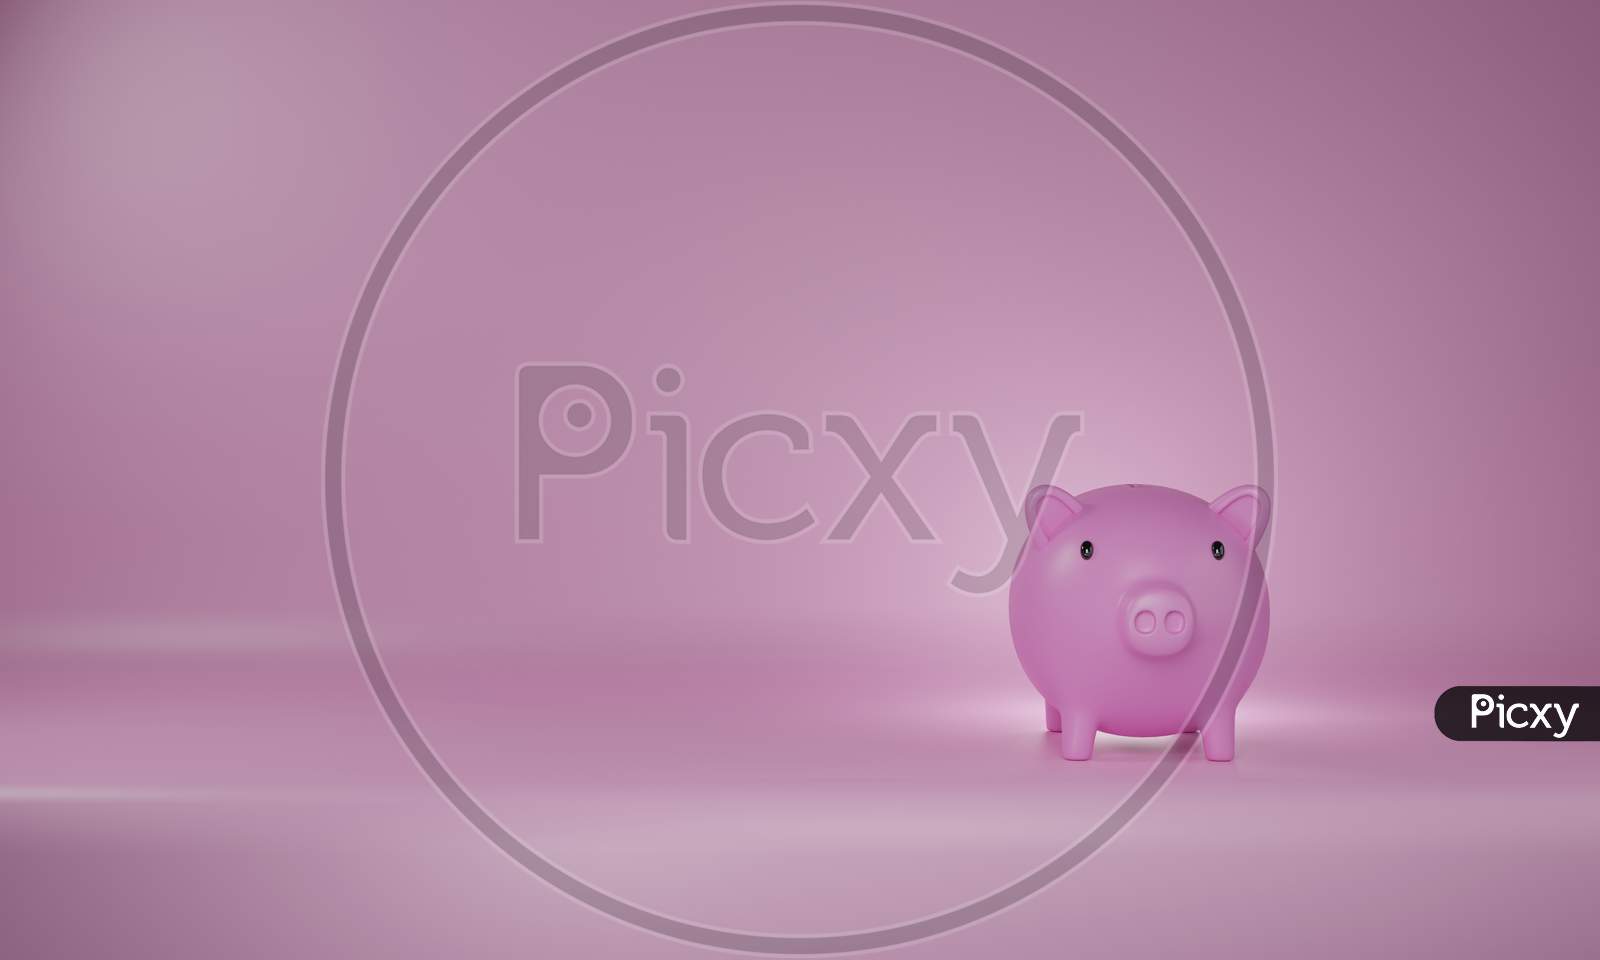 3D Render Illustration Of Piggy Bank On The Pink Screen, Concept Of Saving